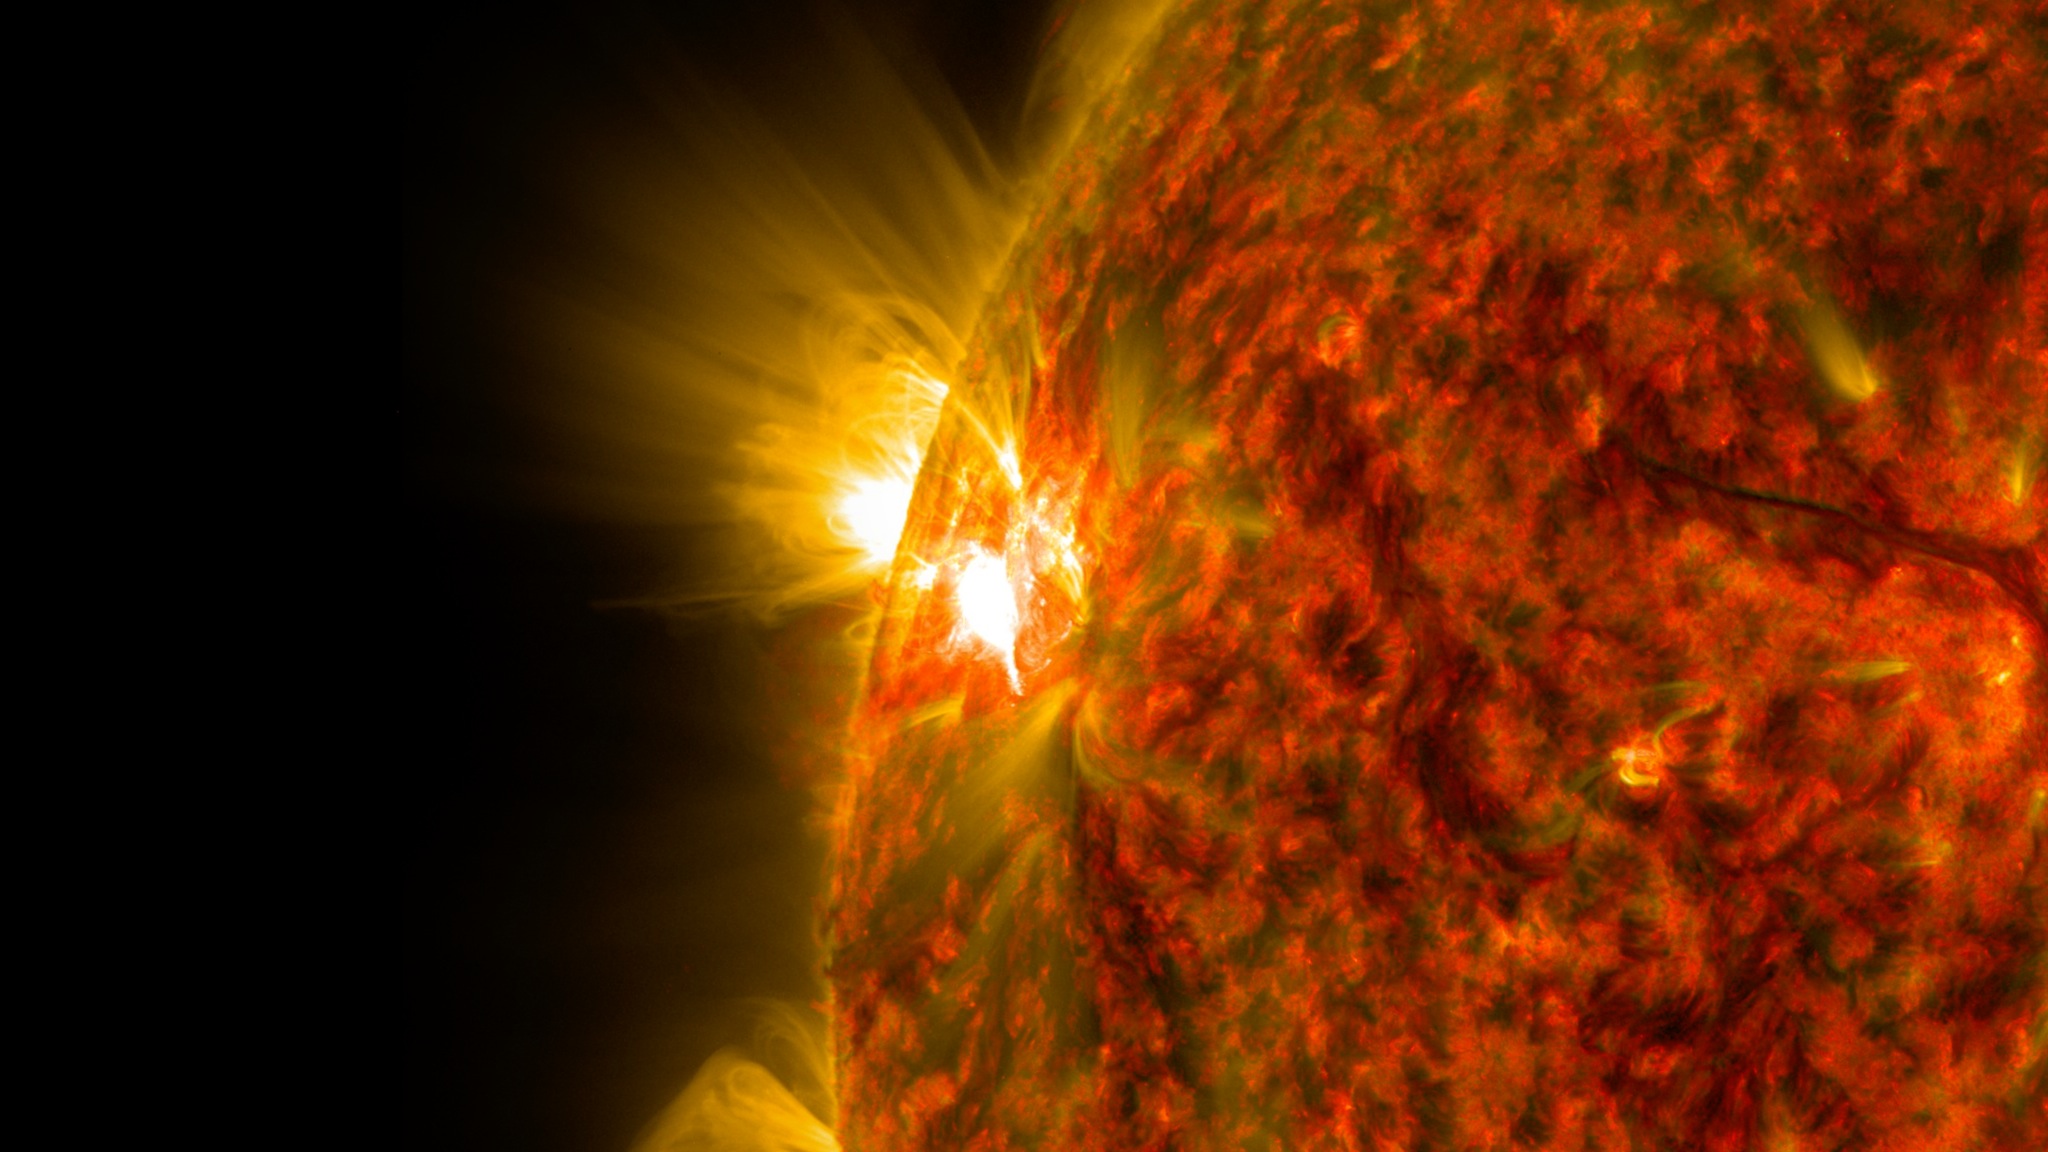 An active region on the sun erupted with a mid-level flare on Nov. 5, 2014, as seen in the bright light of this image captured by NASA's Solar Dynamics Observatory. This image shows extreme ultraviolet light that highlights the hot solar material in the sun's atmosphere. Shown here with the Earth to scale.Credit: NASA/GSFC/SDO